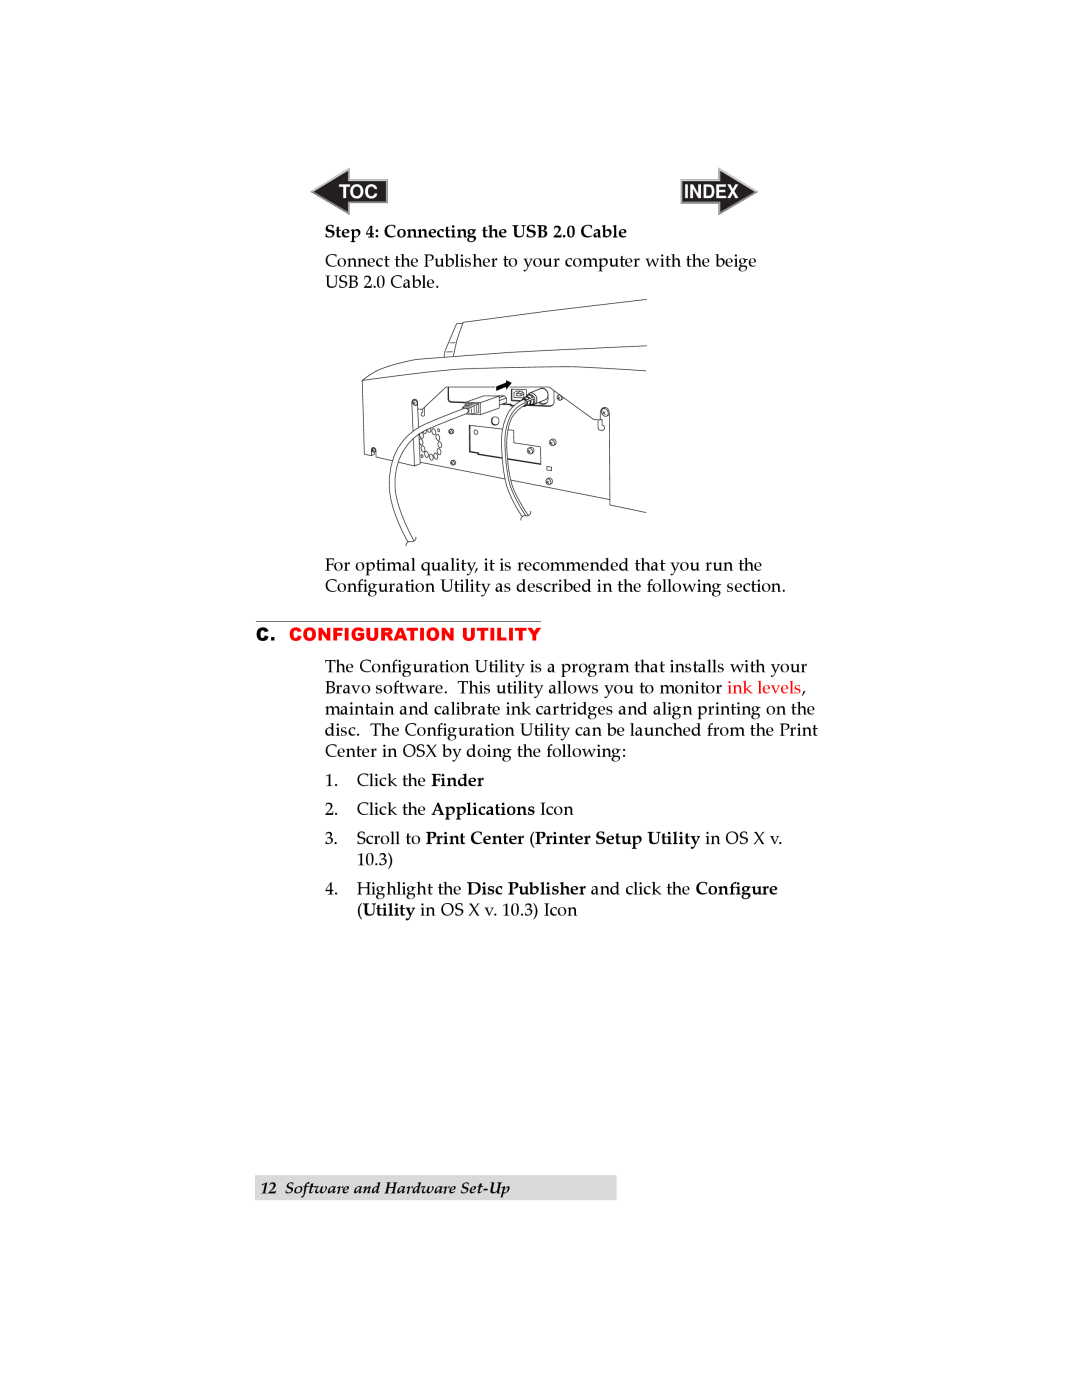 Primera Technology II user manual Index, Connecting the USB 2.0 Cable, C.Configuration Utility 